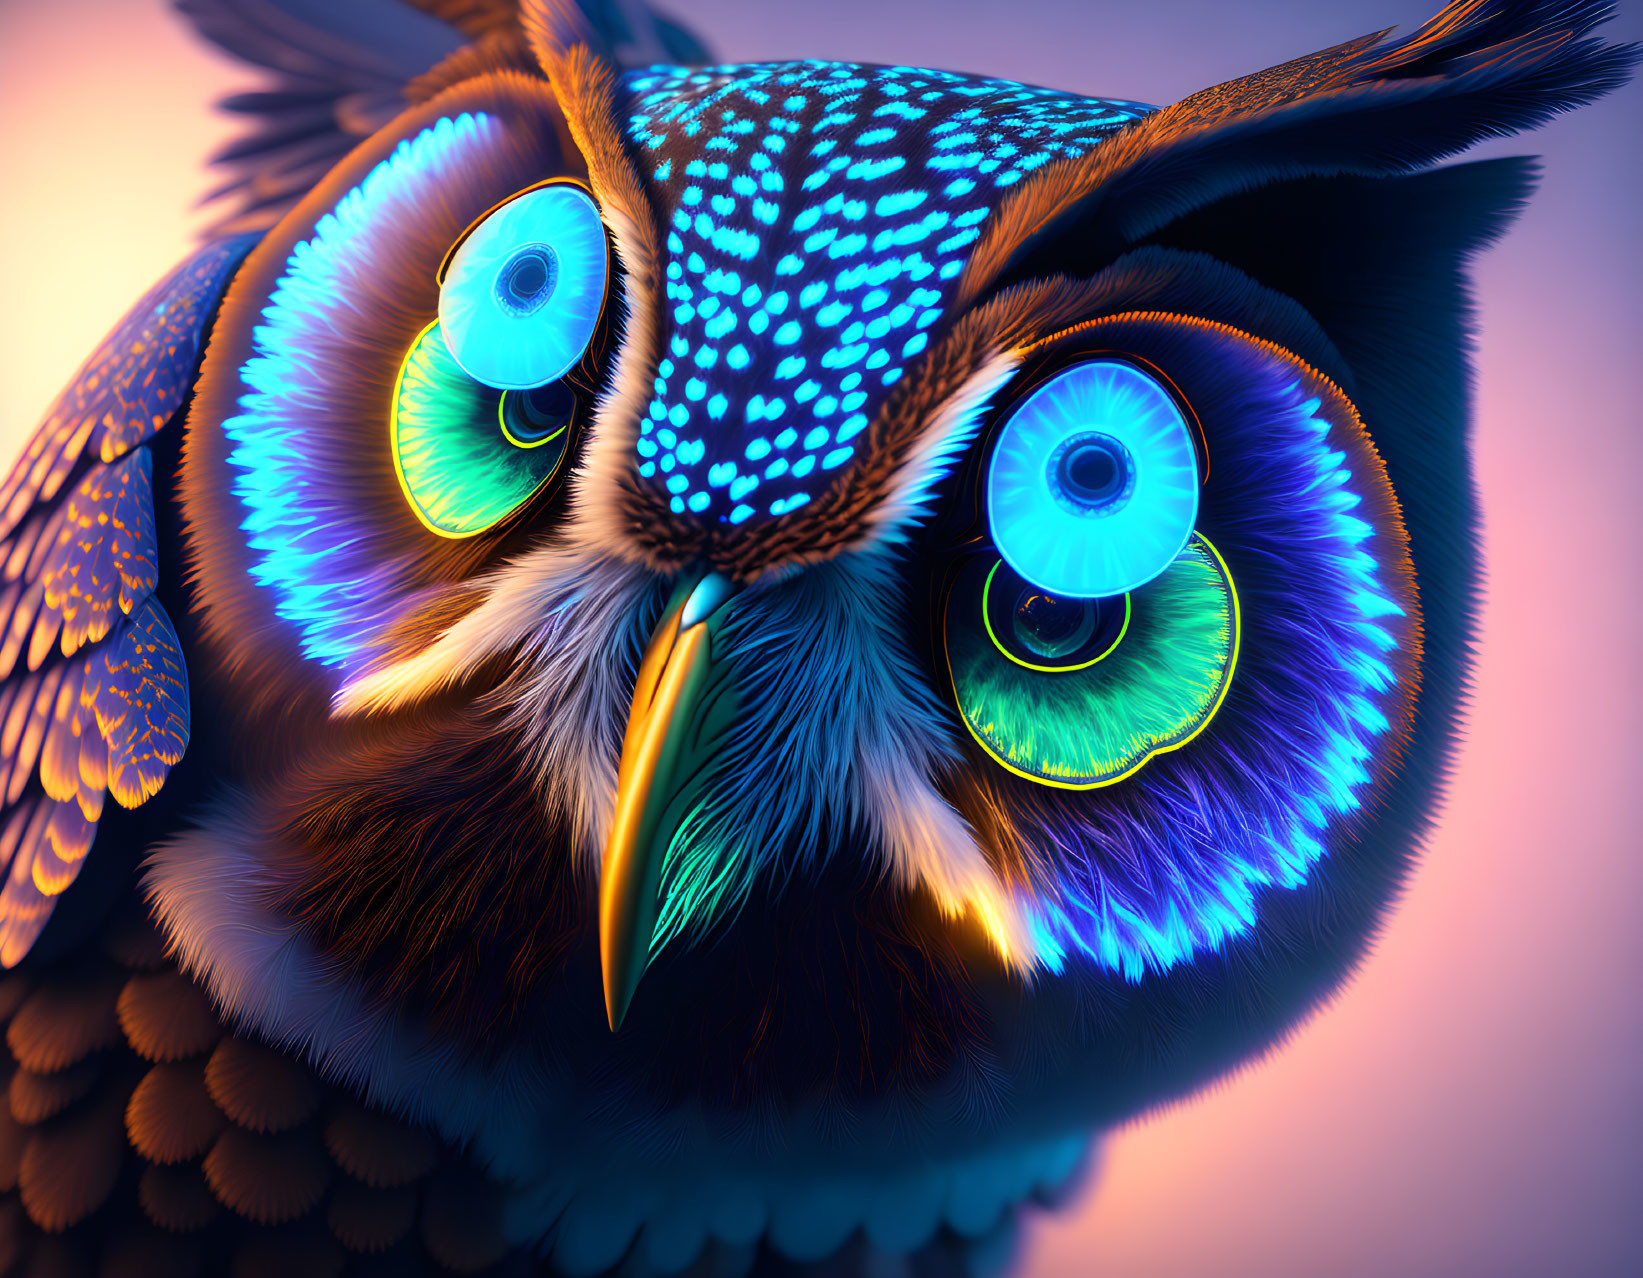 Detailed digital artwork of vibrant owl with neon feathers & mesmerizing eyes